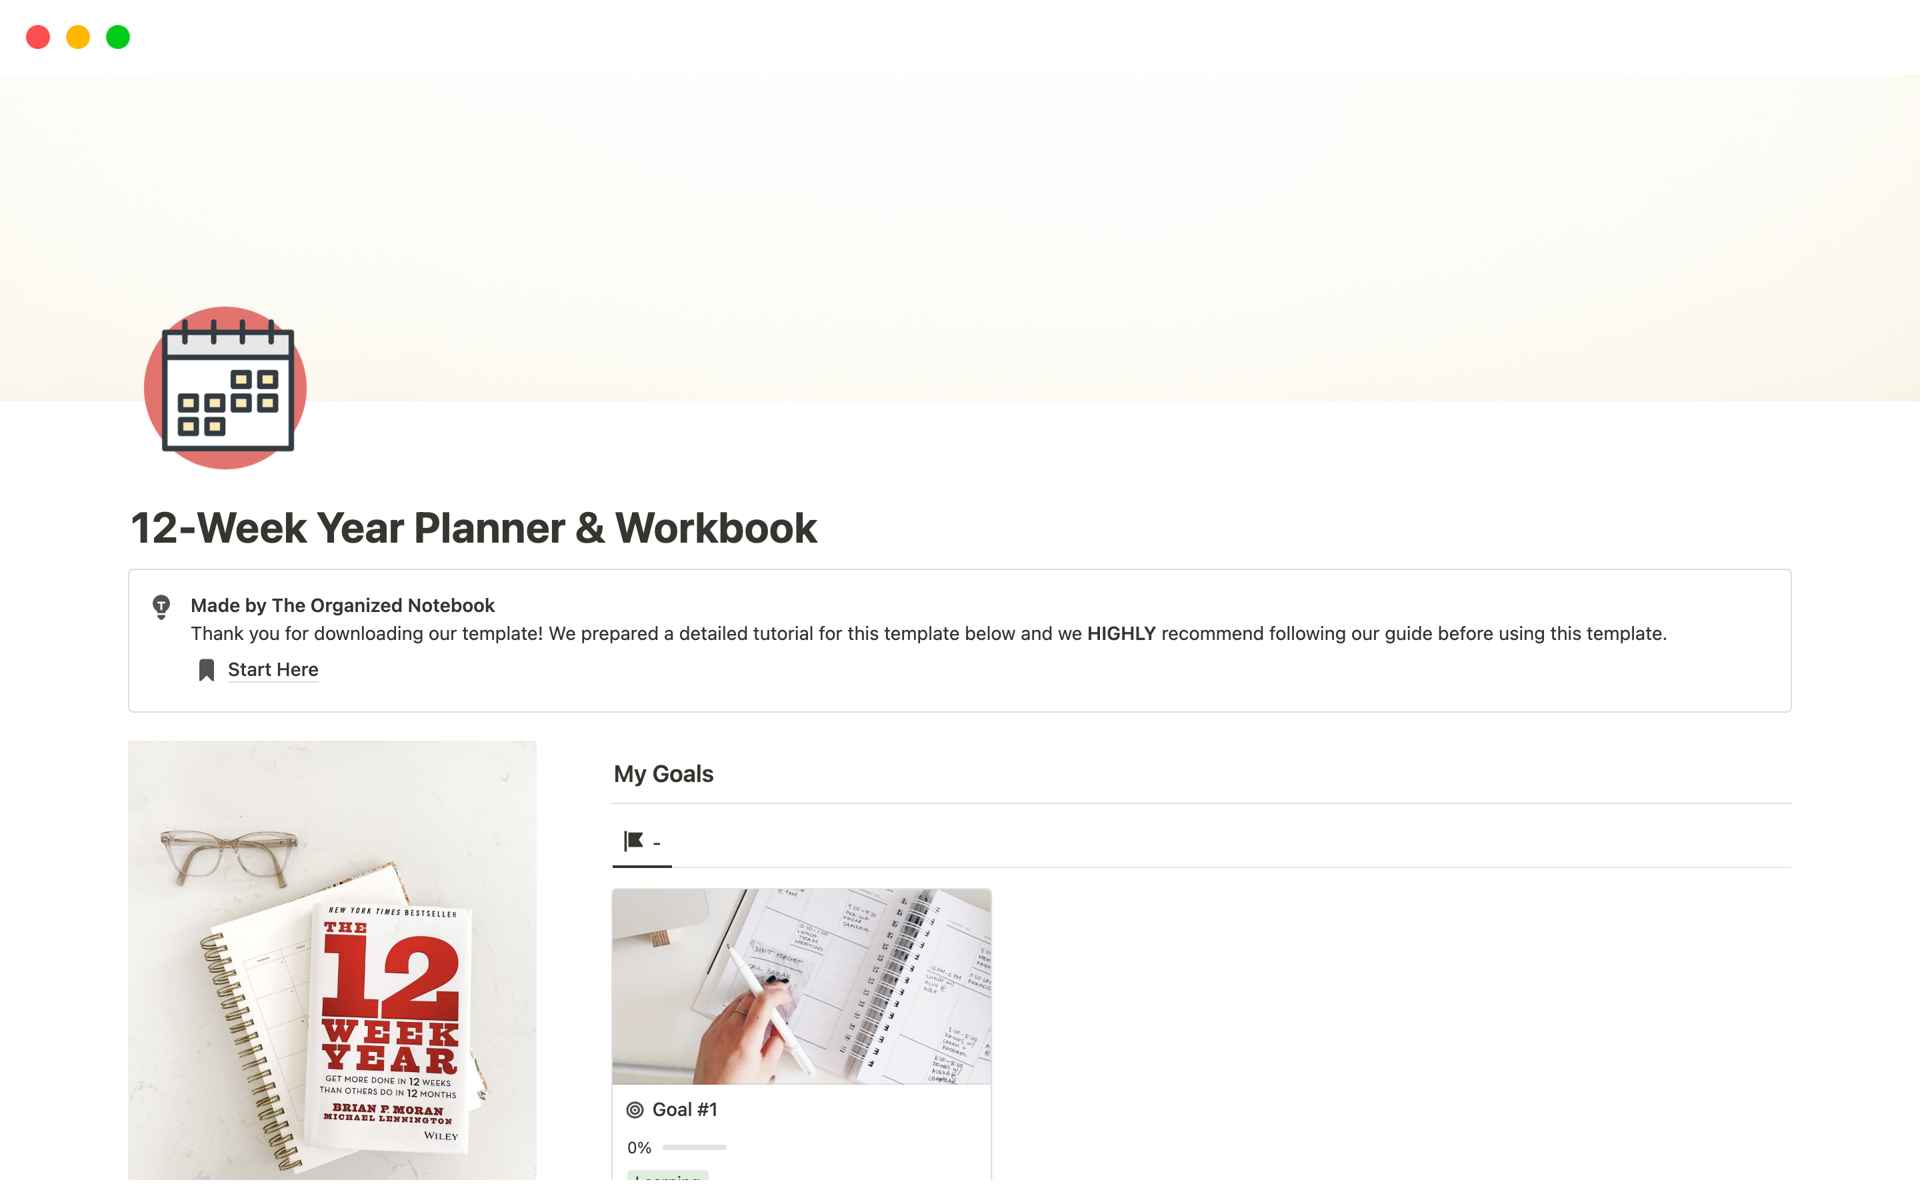 A template preview for 12-Week Year Planner & Workbook